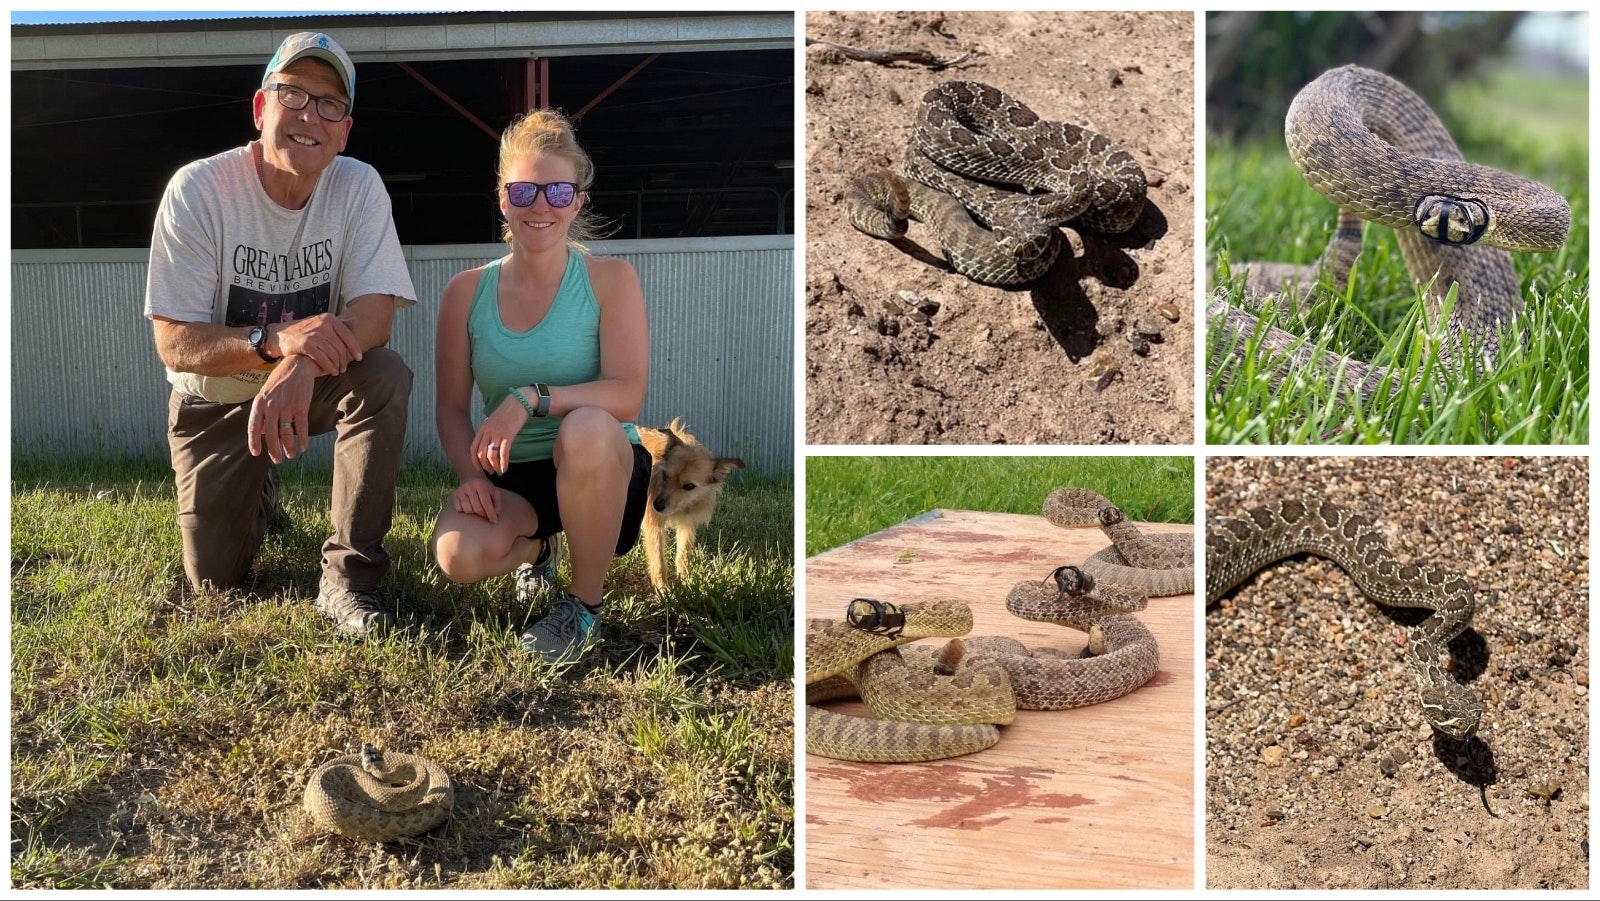 Jerry Colson, his daughter Ashlea Roberts, and a dog named Nitro with one of the rattlesnakes they catch in Rawlins for Roberts' rattlesnake avoidance clinic, an obedience class for dogs.